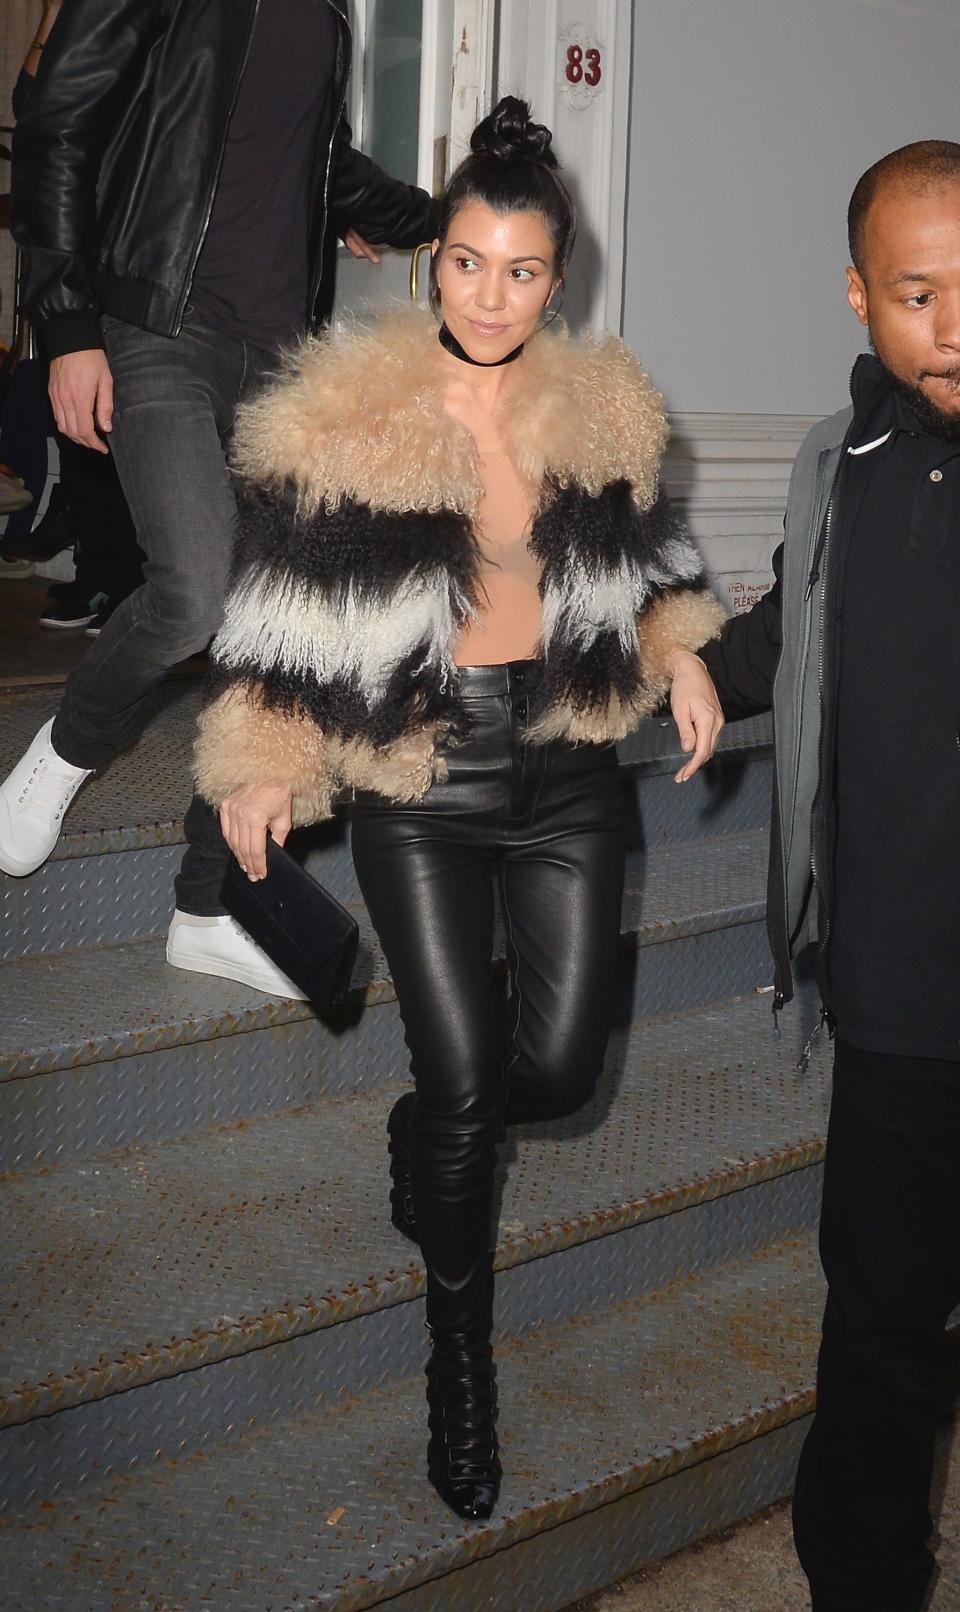 Kourtney in a beige, black, and white feather and fur cropped coat, a sheer top, and leather pants and boots.